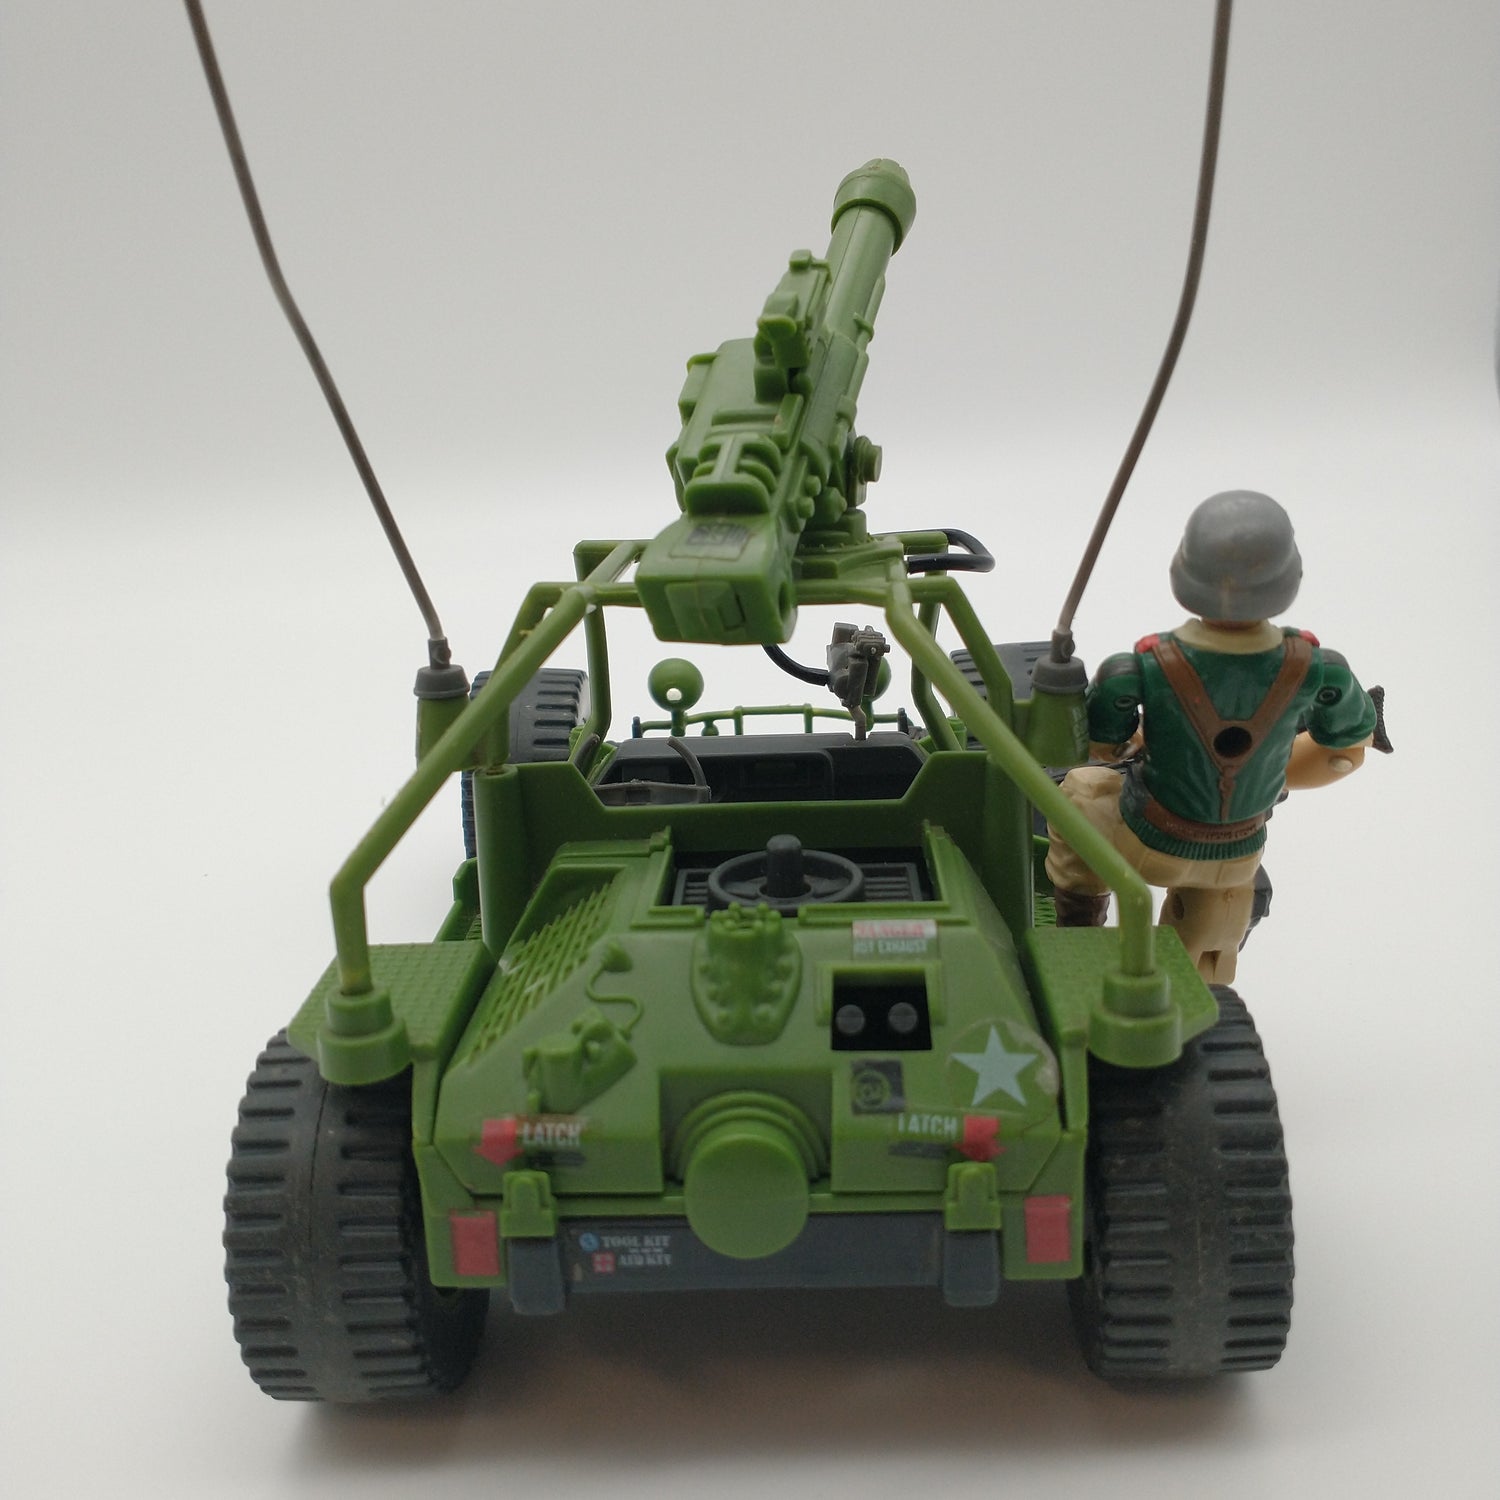 The back of the figure and vehicle.